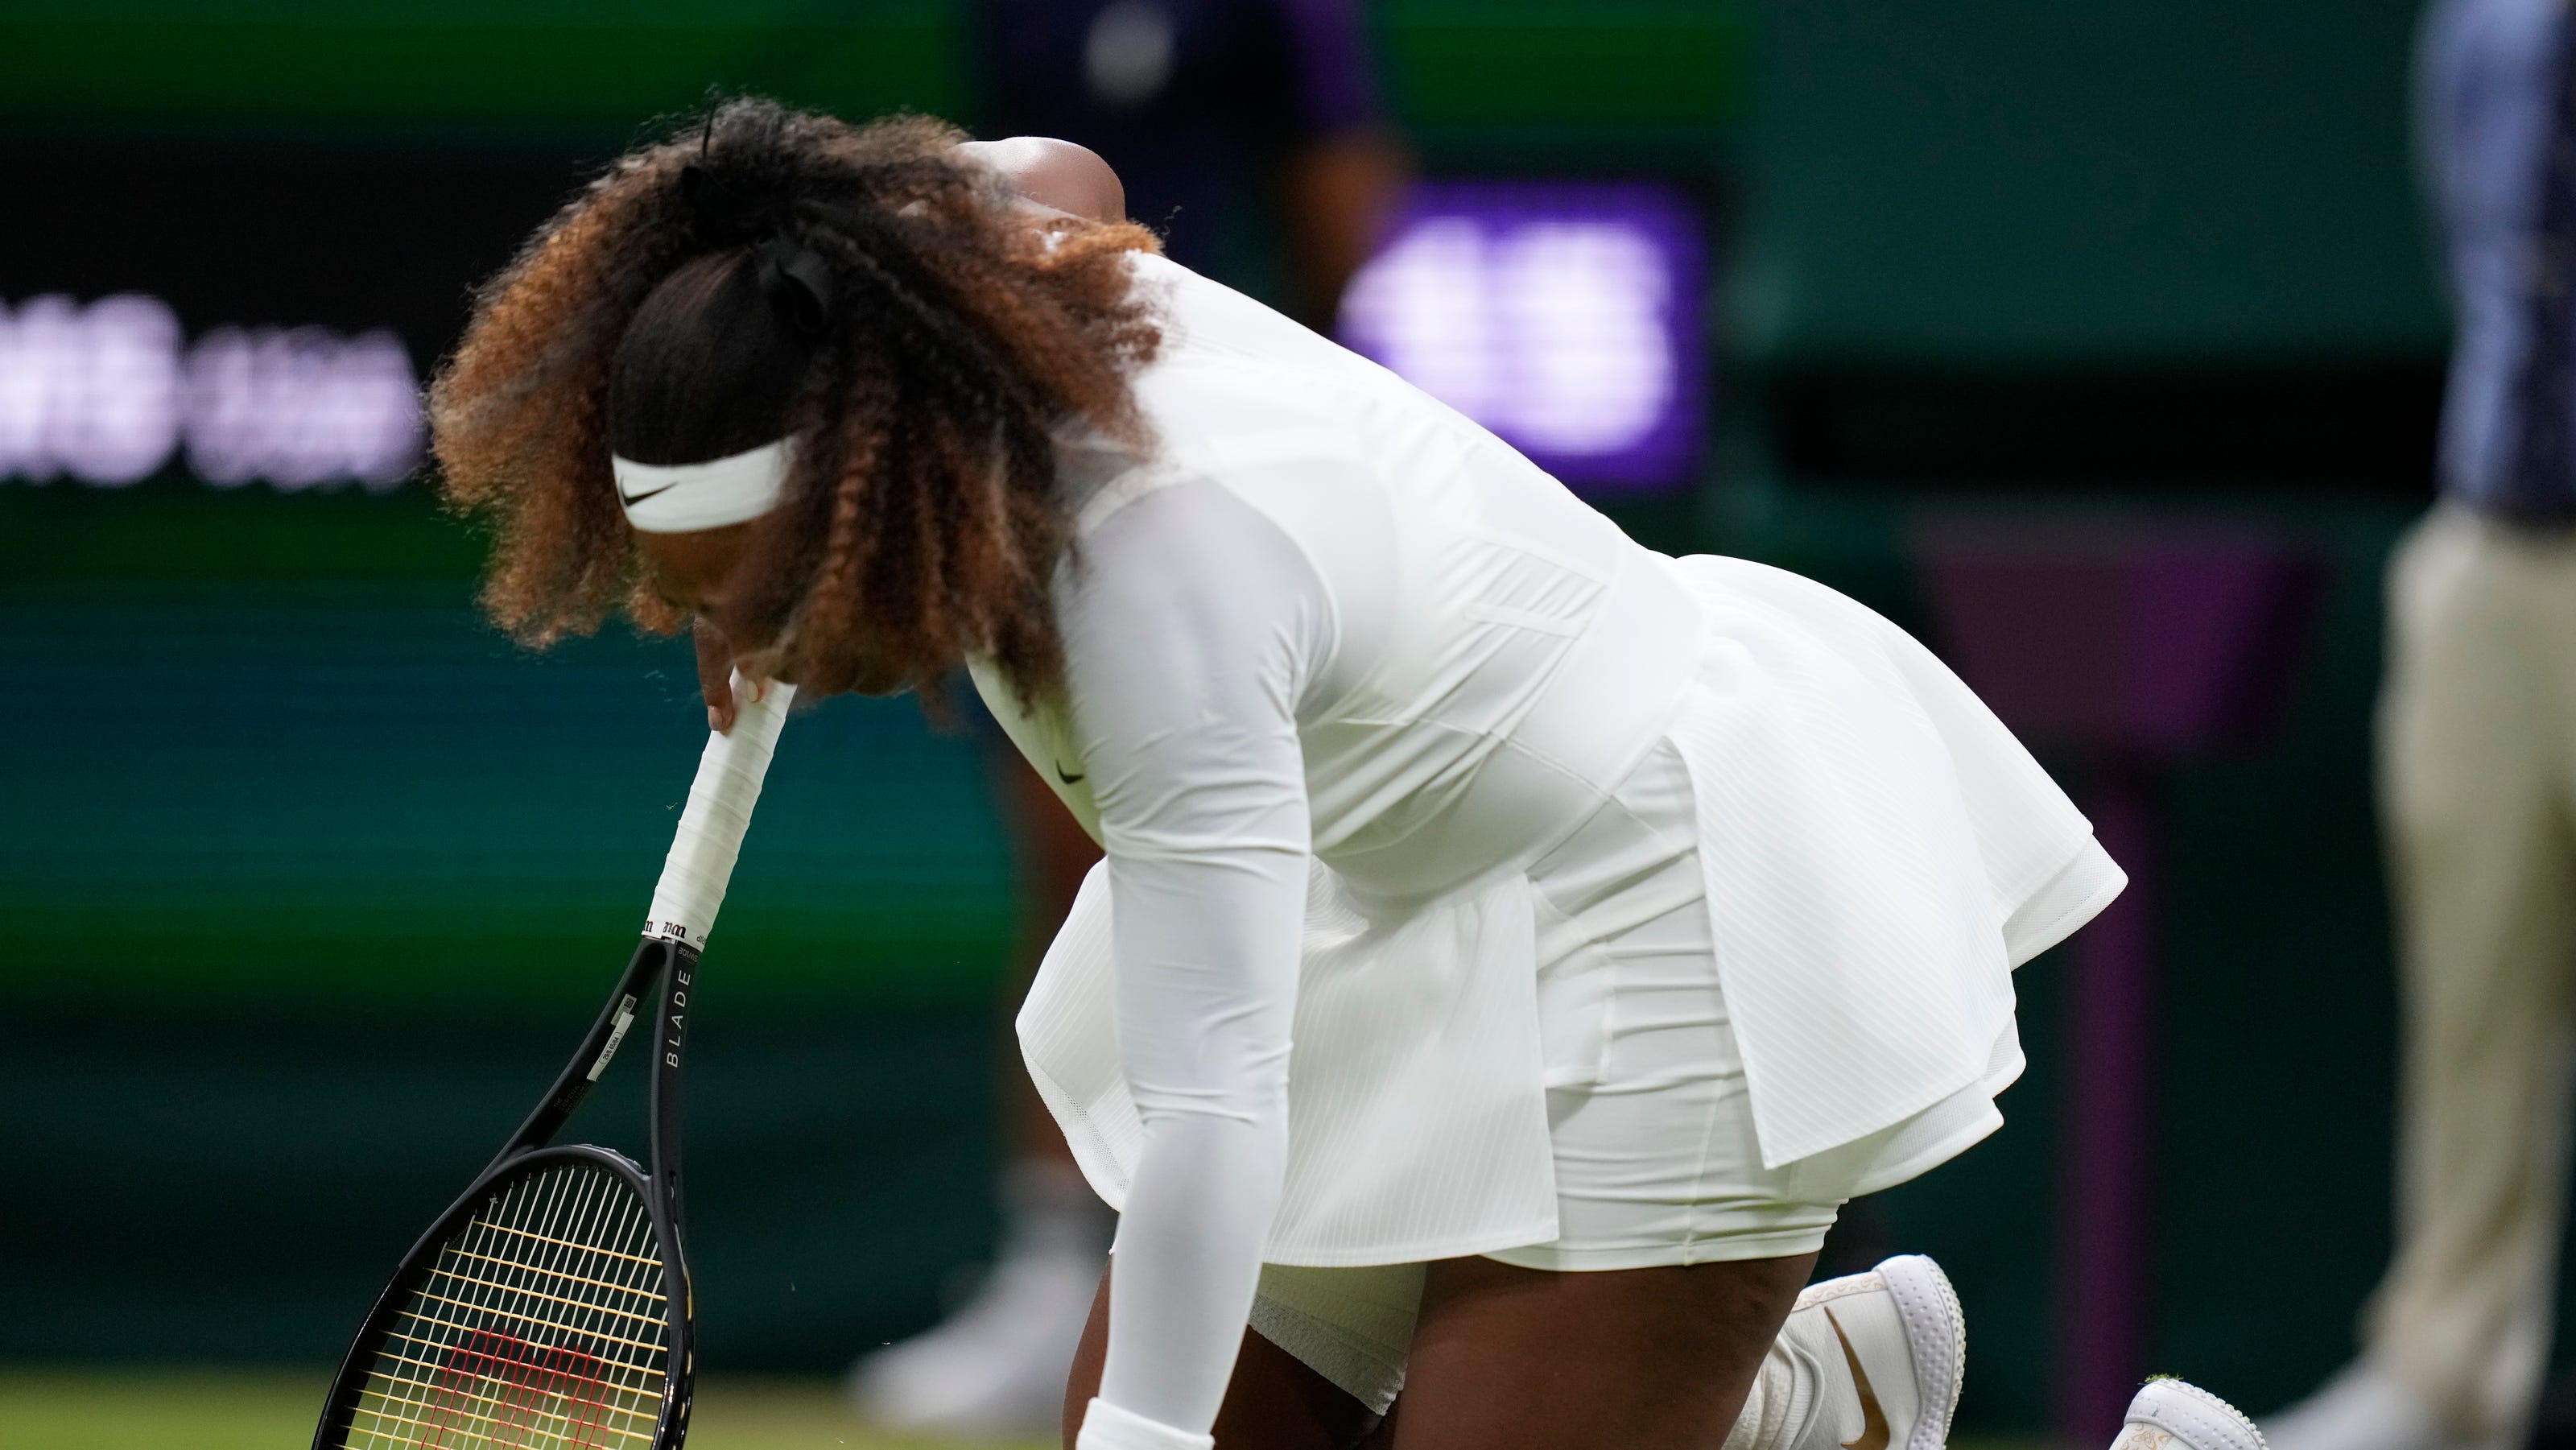 Serena Williams / Mouratoglou Backs Unstoppable Williams To Win Wimbledon : Serena jameka williams (born september 26, 1981) is an american professional tennis player and former world no.